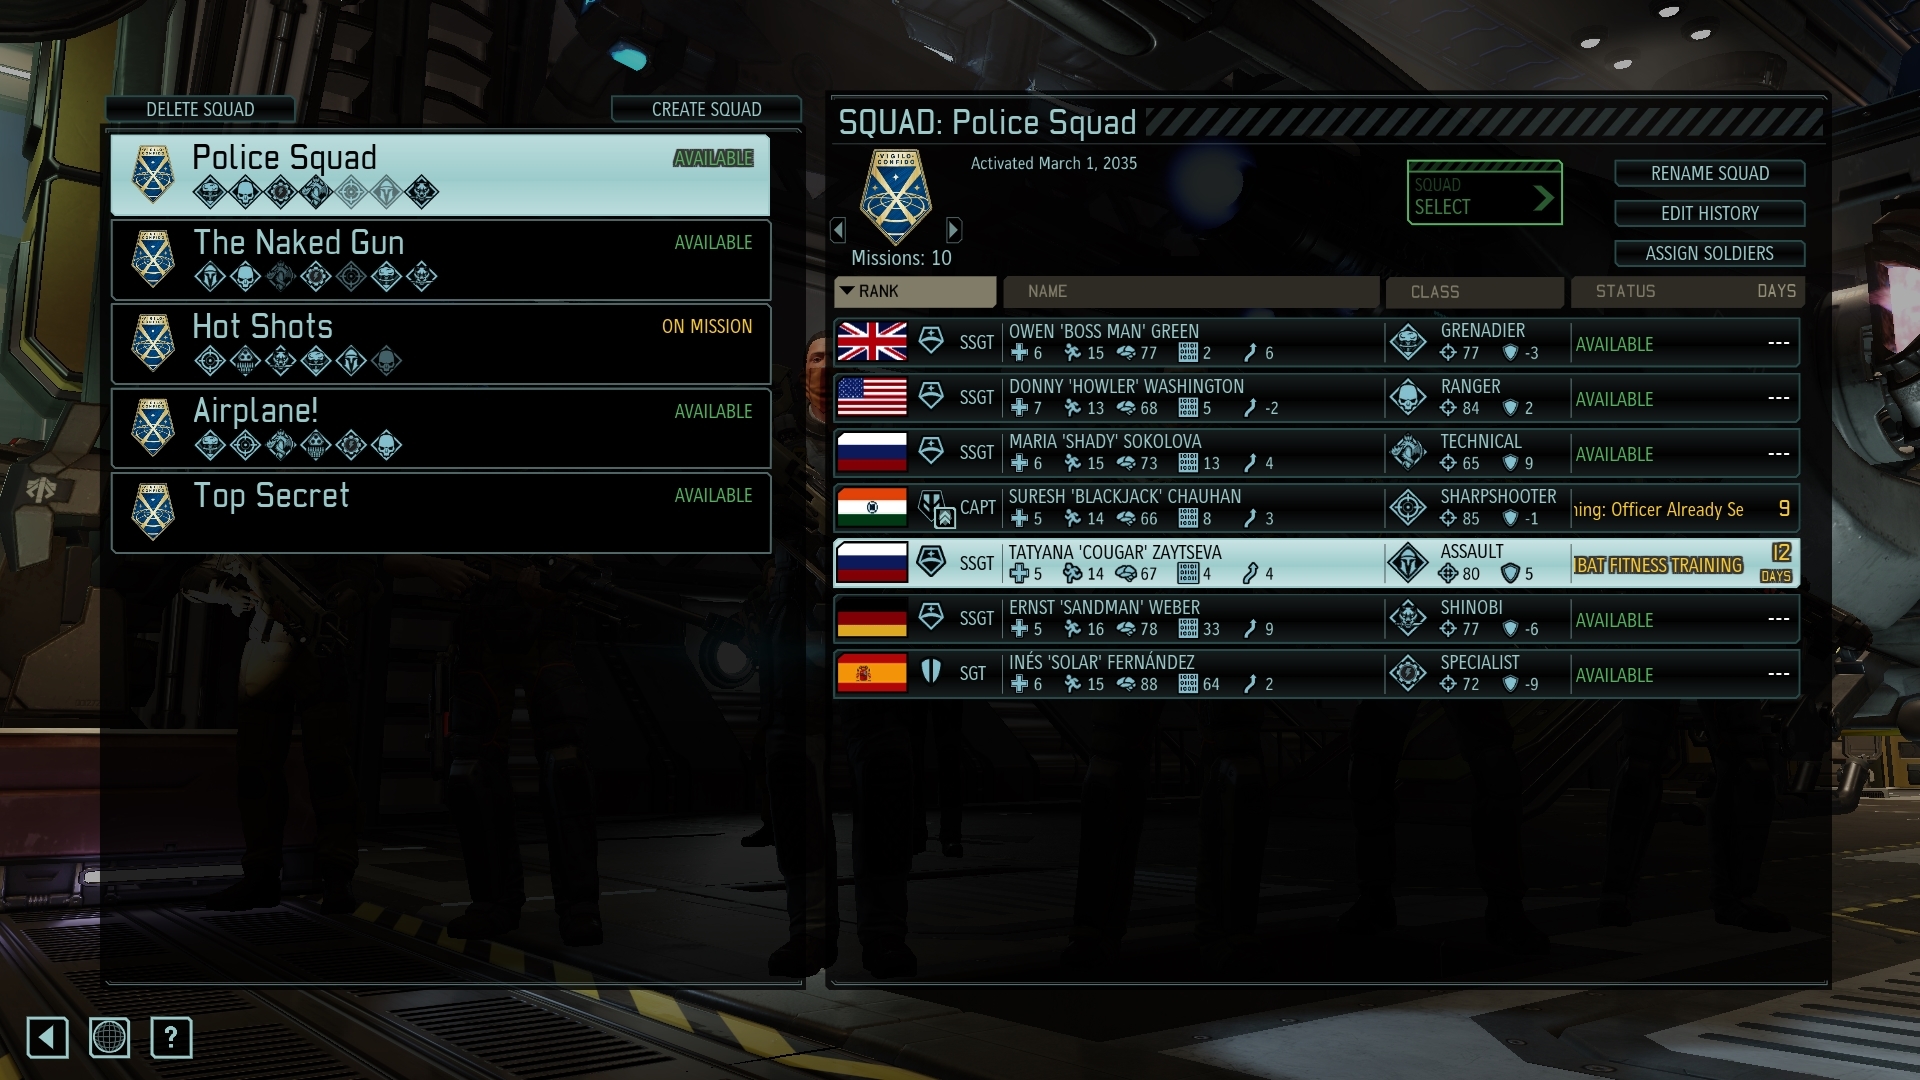 I am having too much fun with the squad management system r/Xcom picture